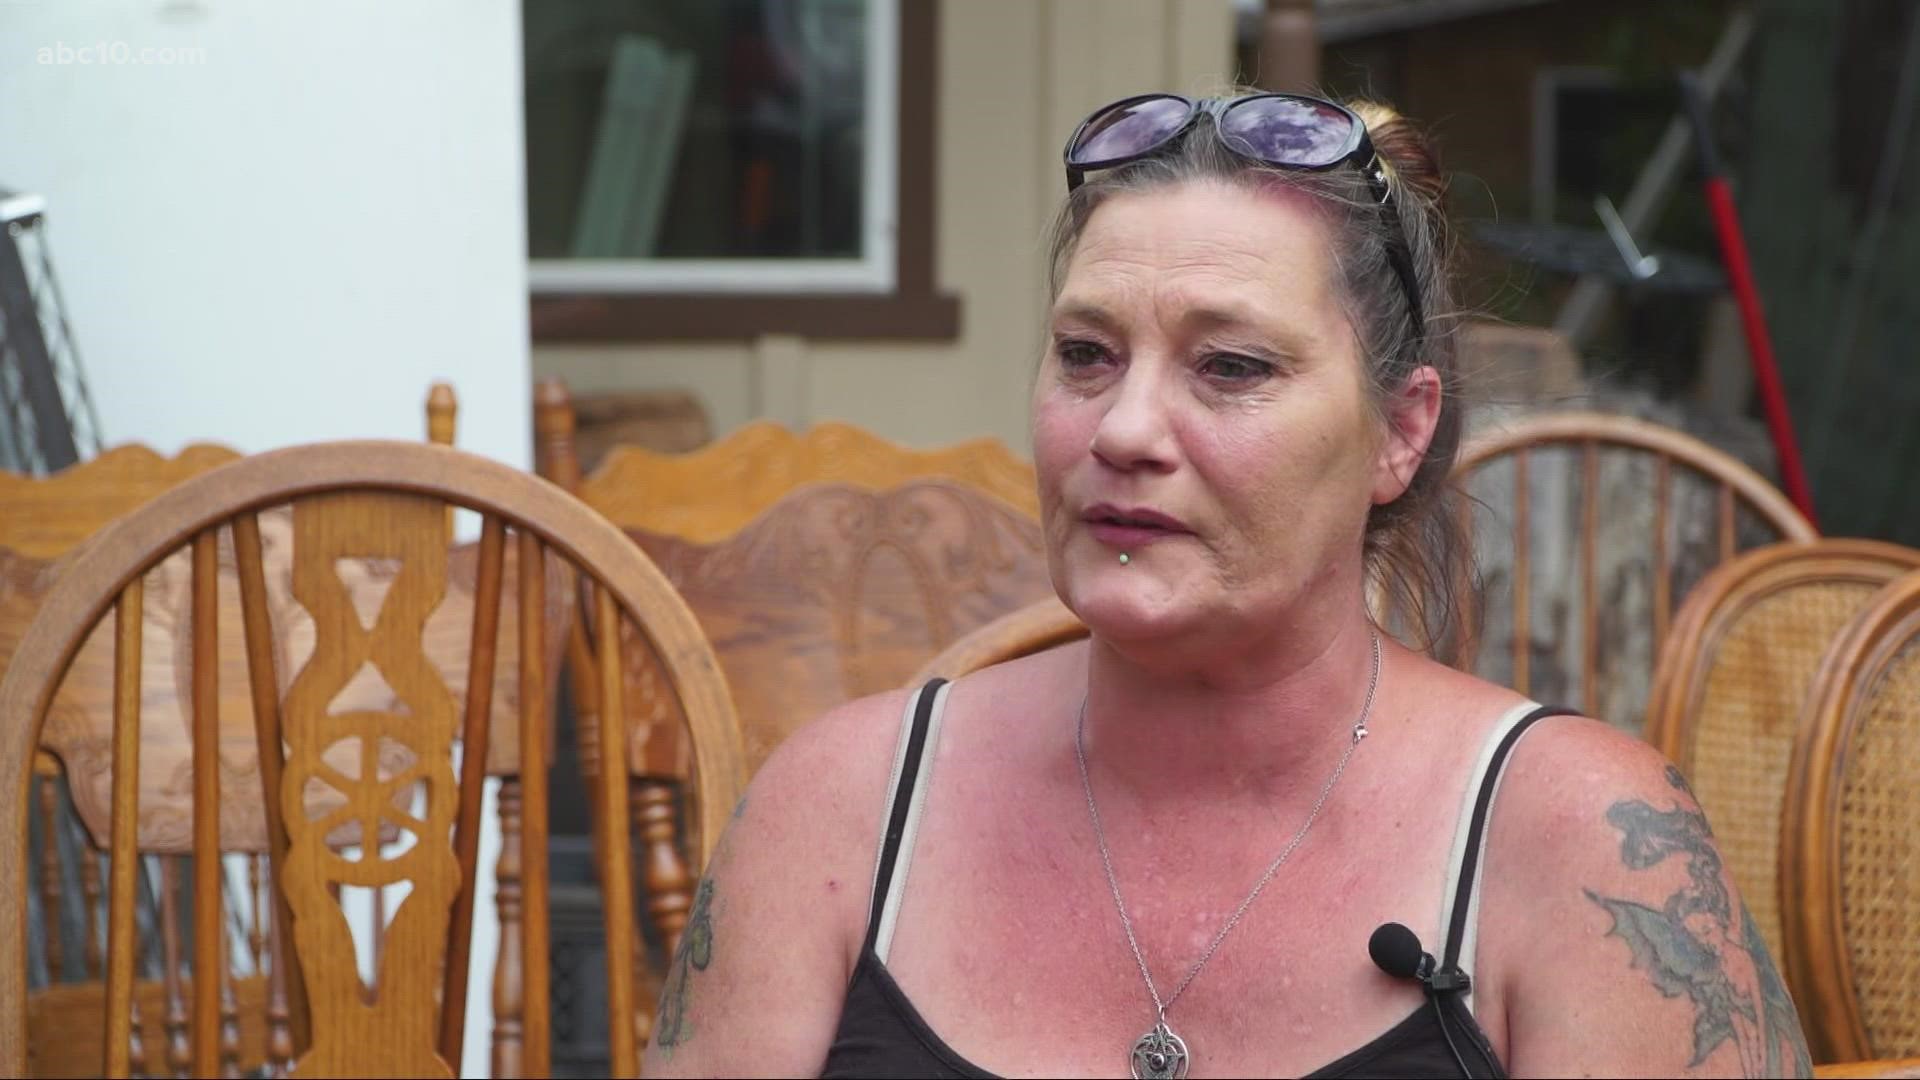 Grizzly Flats woman mourns loss of home Caldor Fire abc10 image image